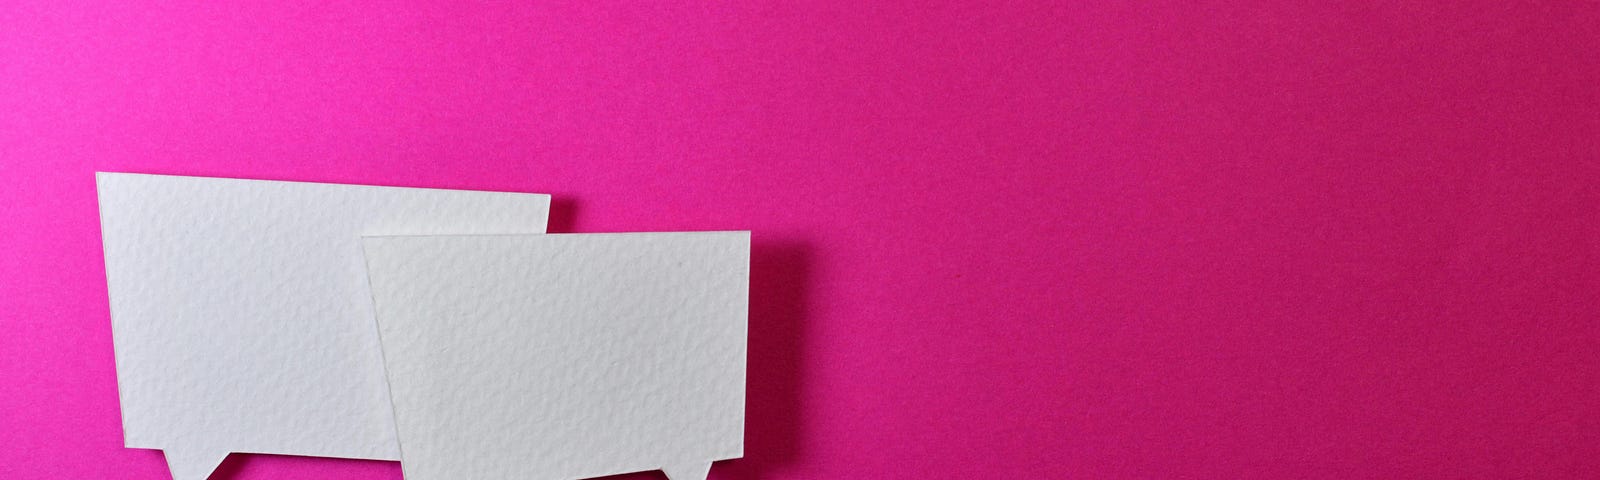 Two square white speech bubbles on a bright pink background.